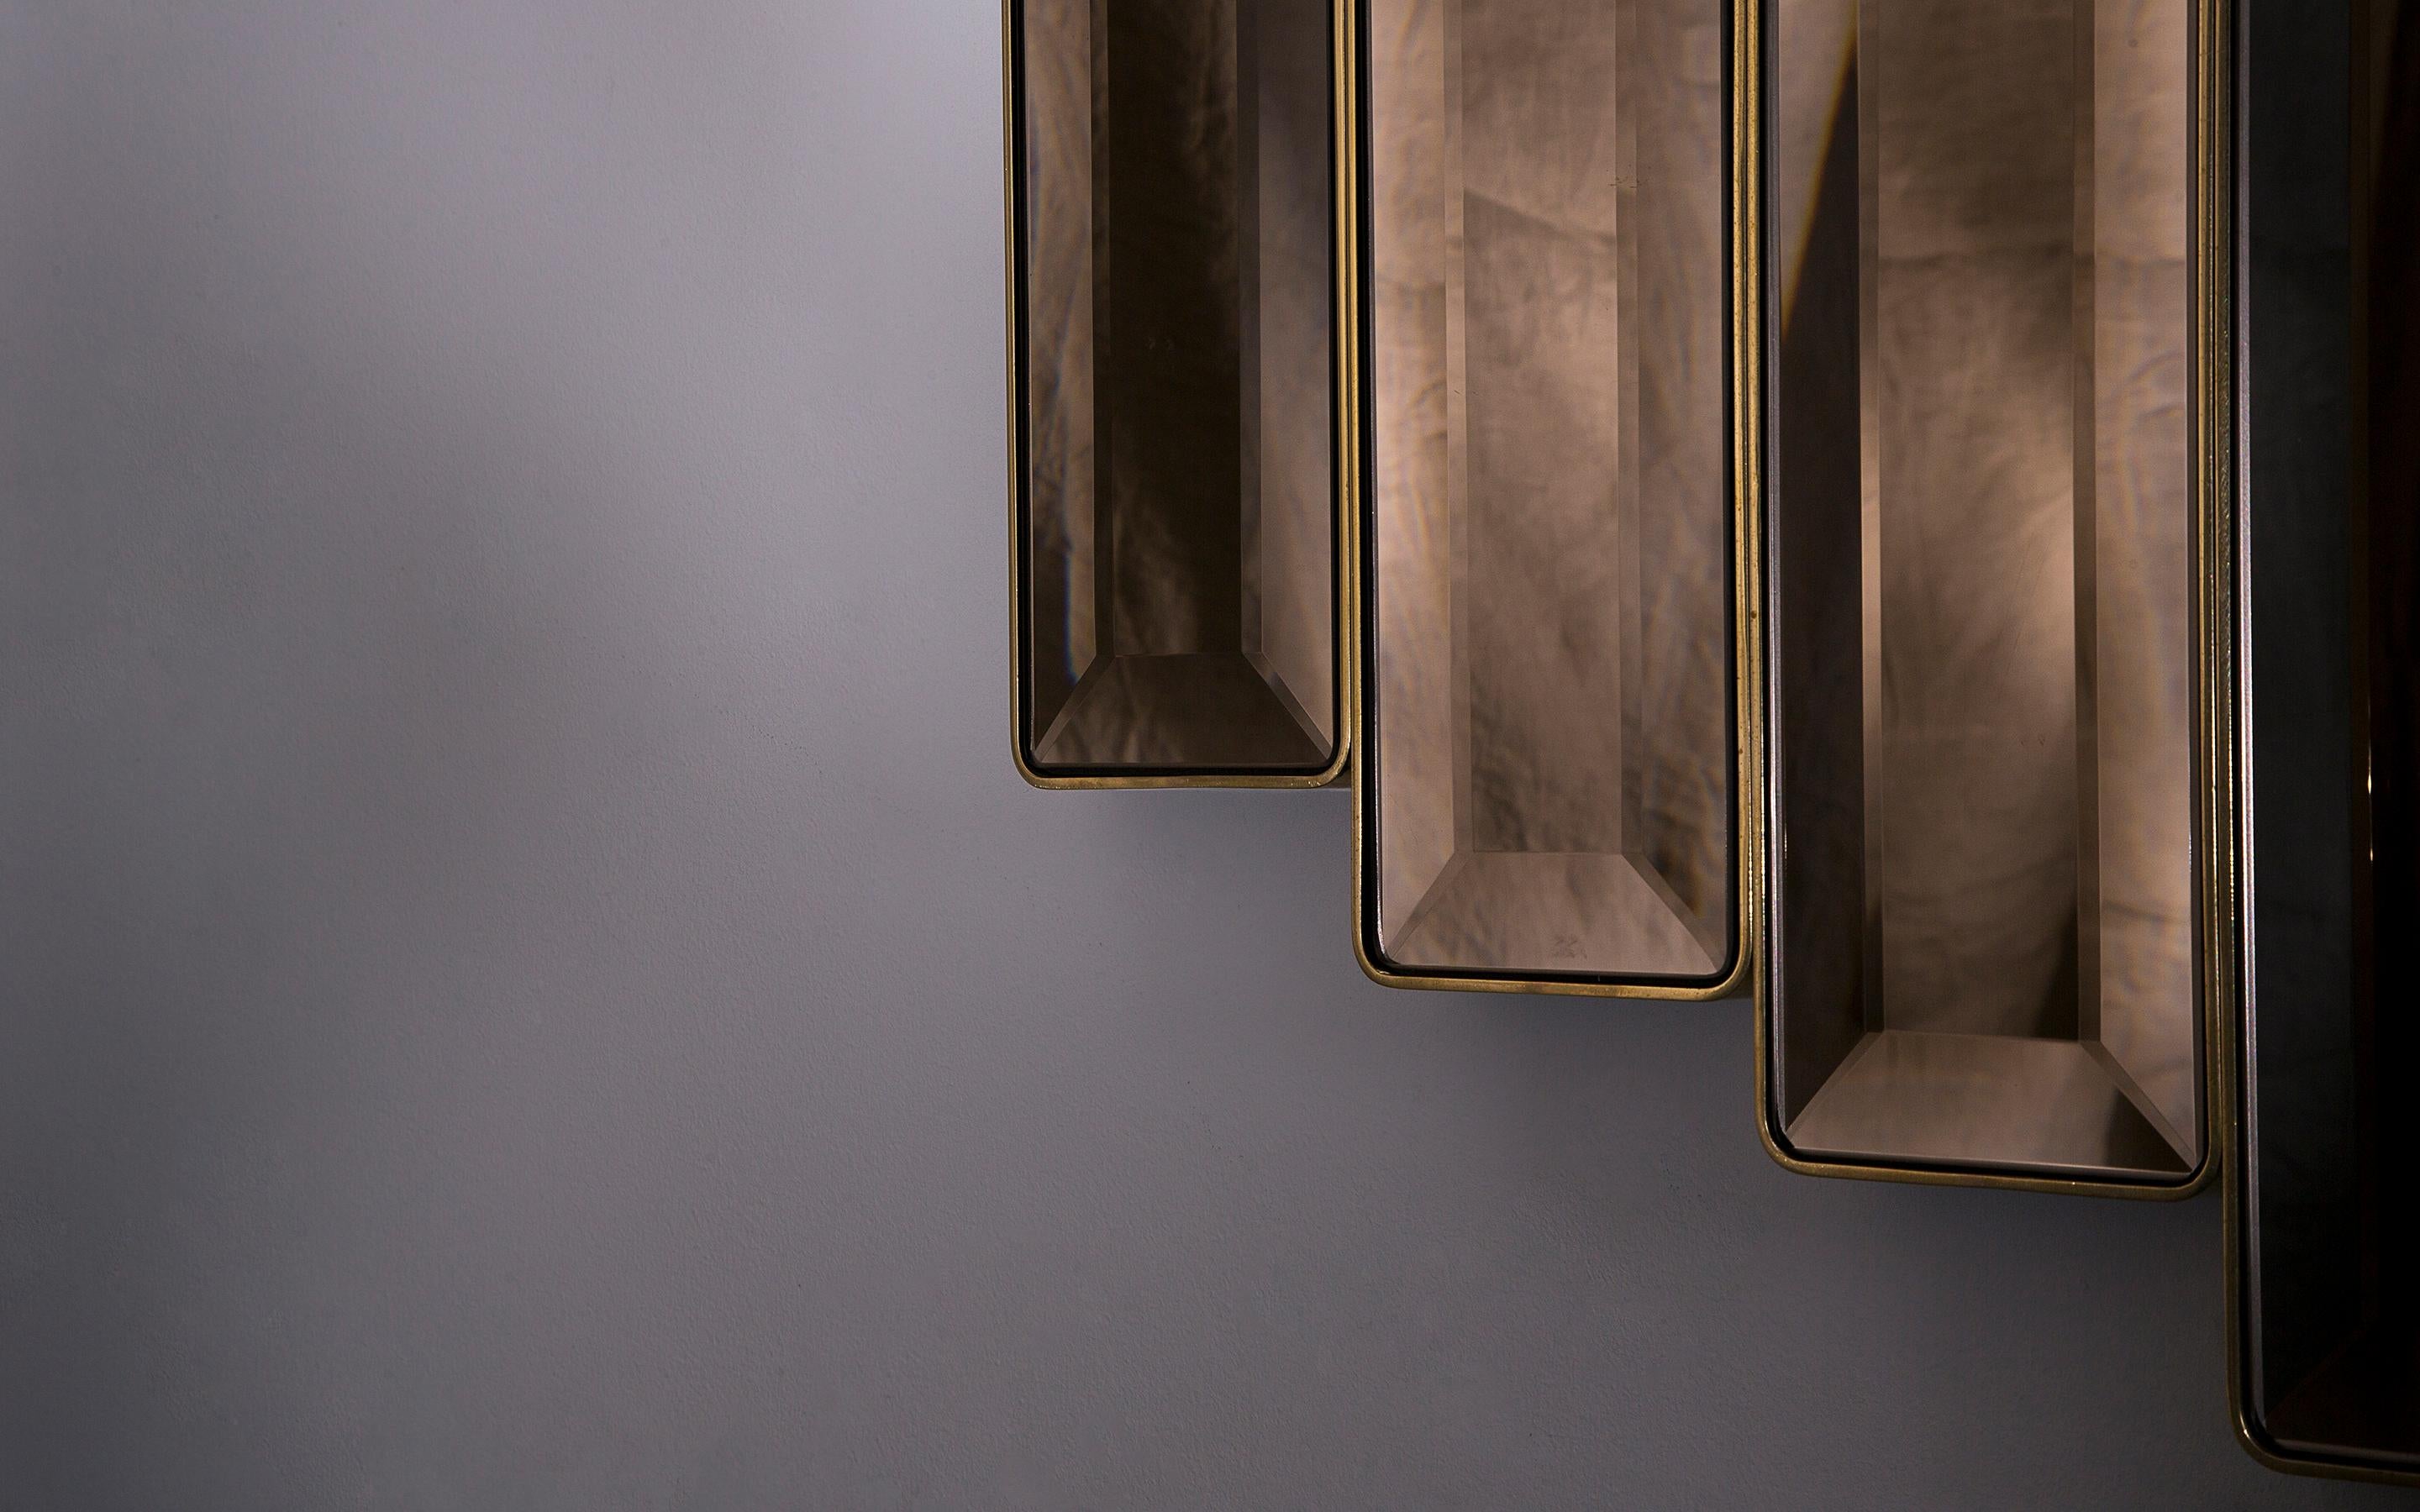 Tata Polished brass sculptural mirror signed by Novocastrian
Measures: 110 (W) x 100 (H) x 2 (D)
Materials: Polished Brass
Custom sizes available.

Wall-mounted Tata mirror with polished brass frame. Beveled bronze or grey tinted glass available.